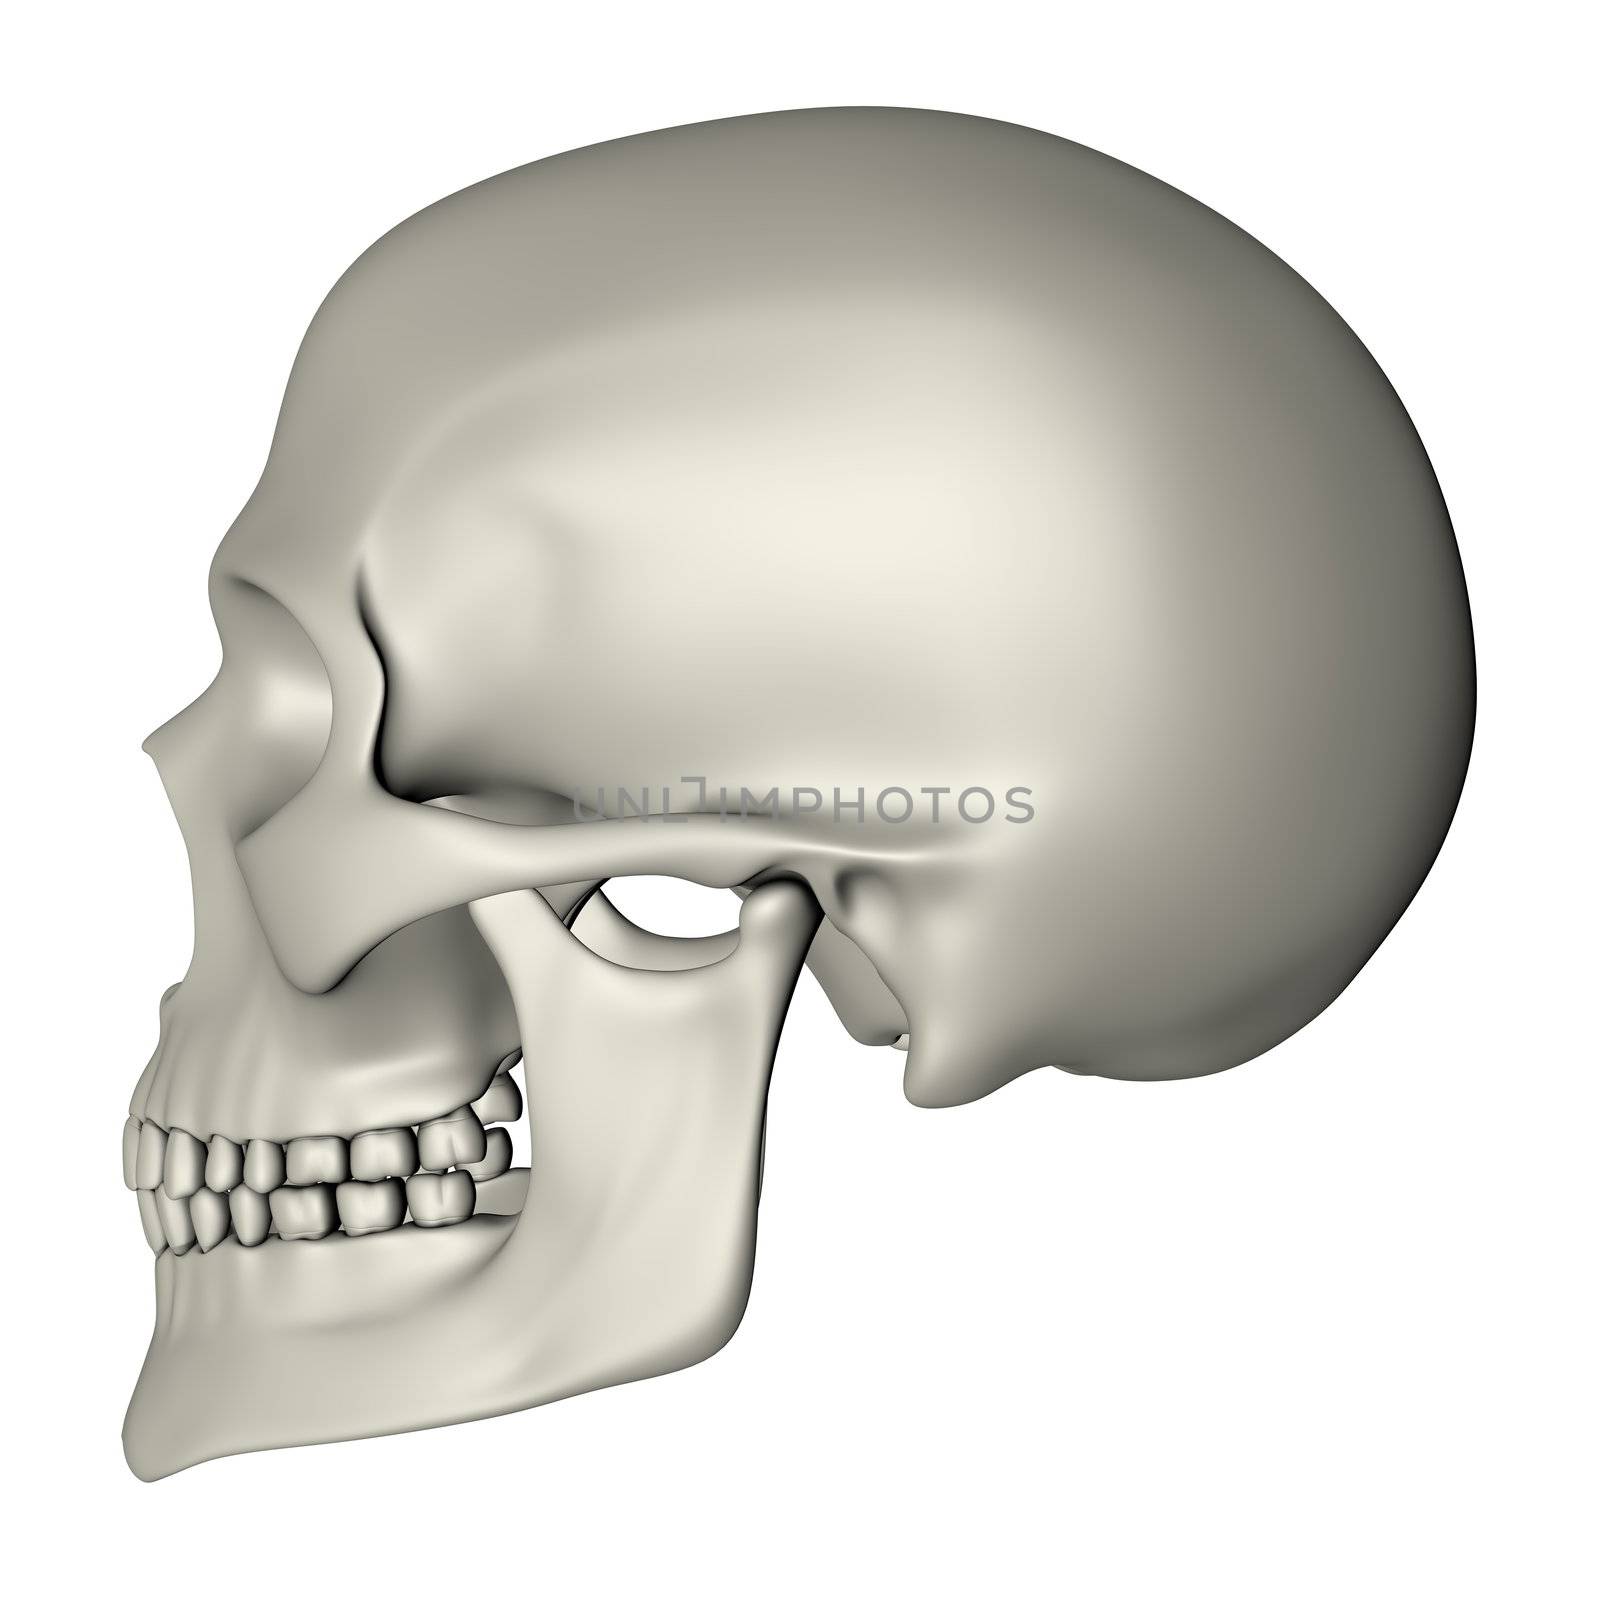 rendered image of a human skull - side view